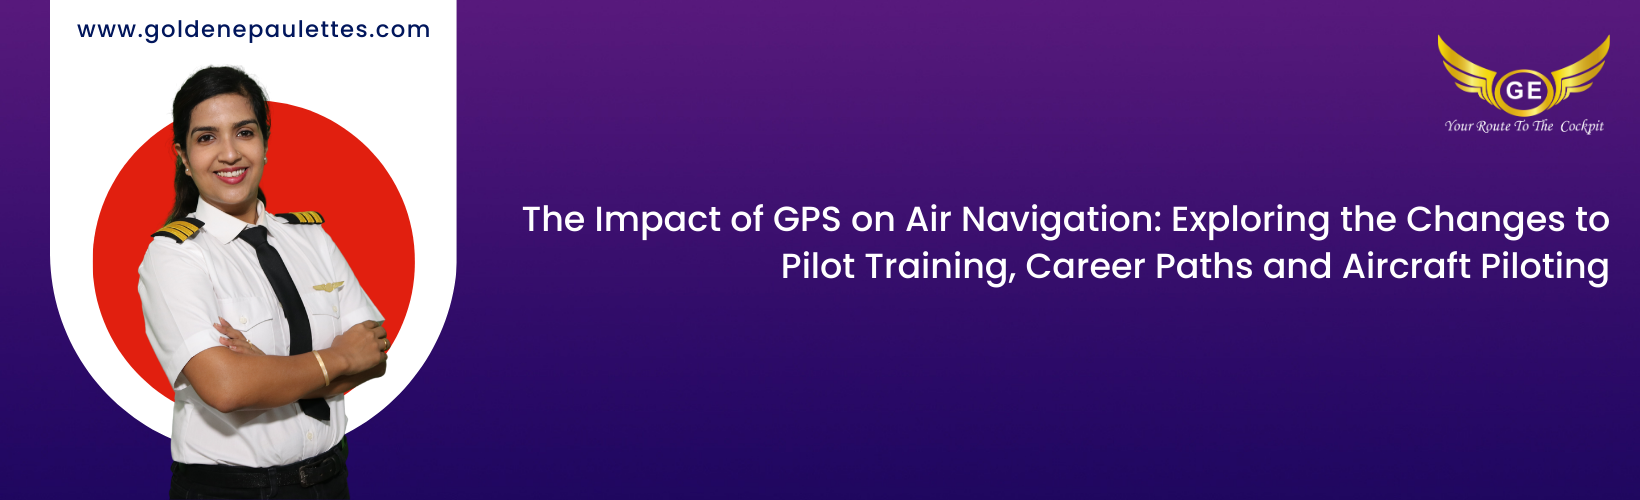 The Impact of GPS on Air Navigation